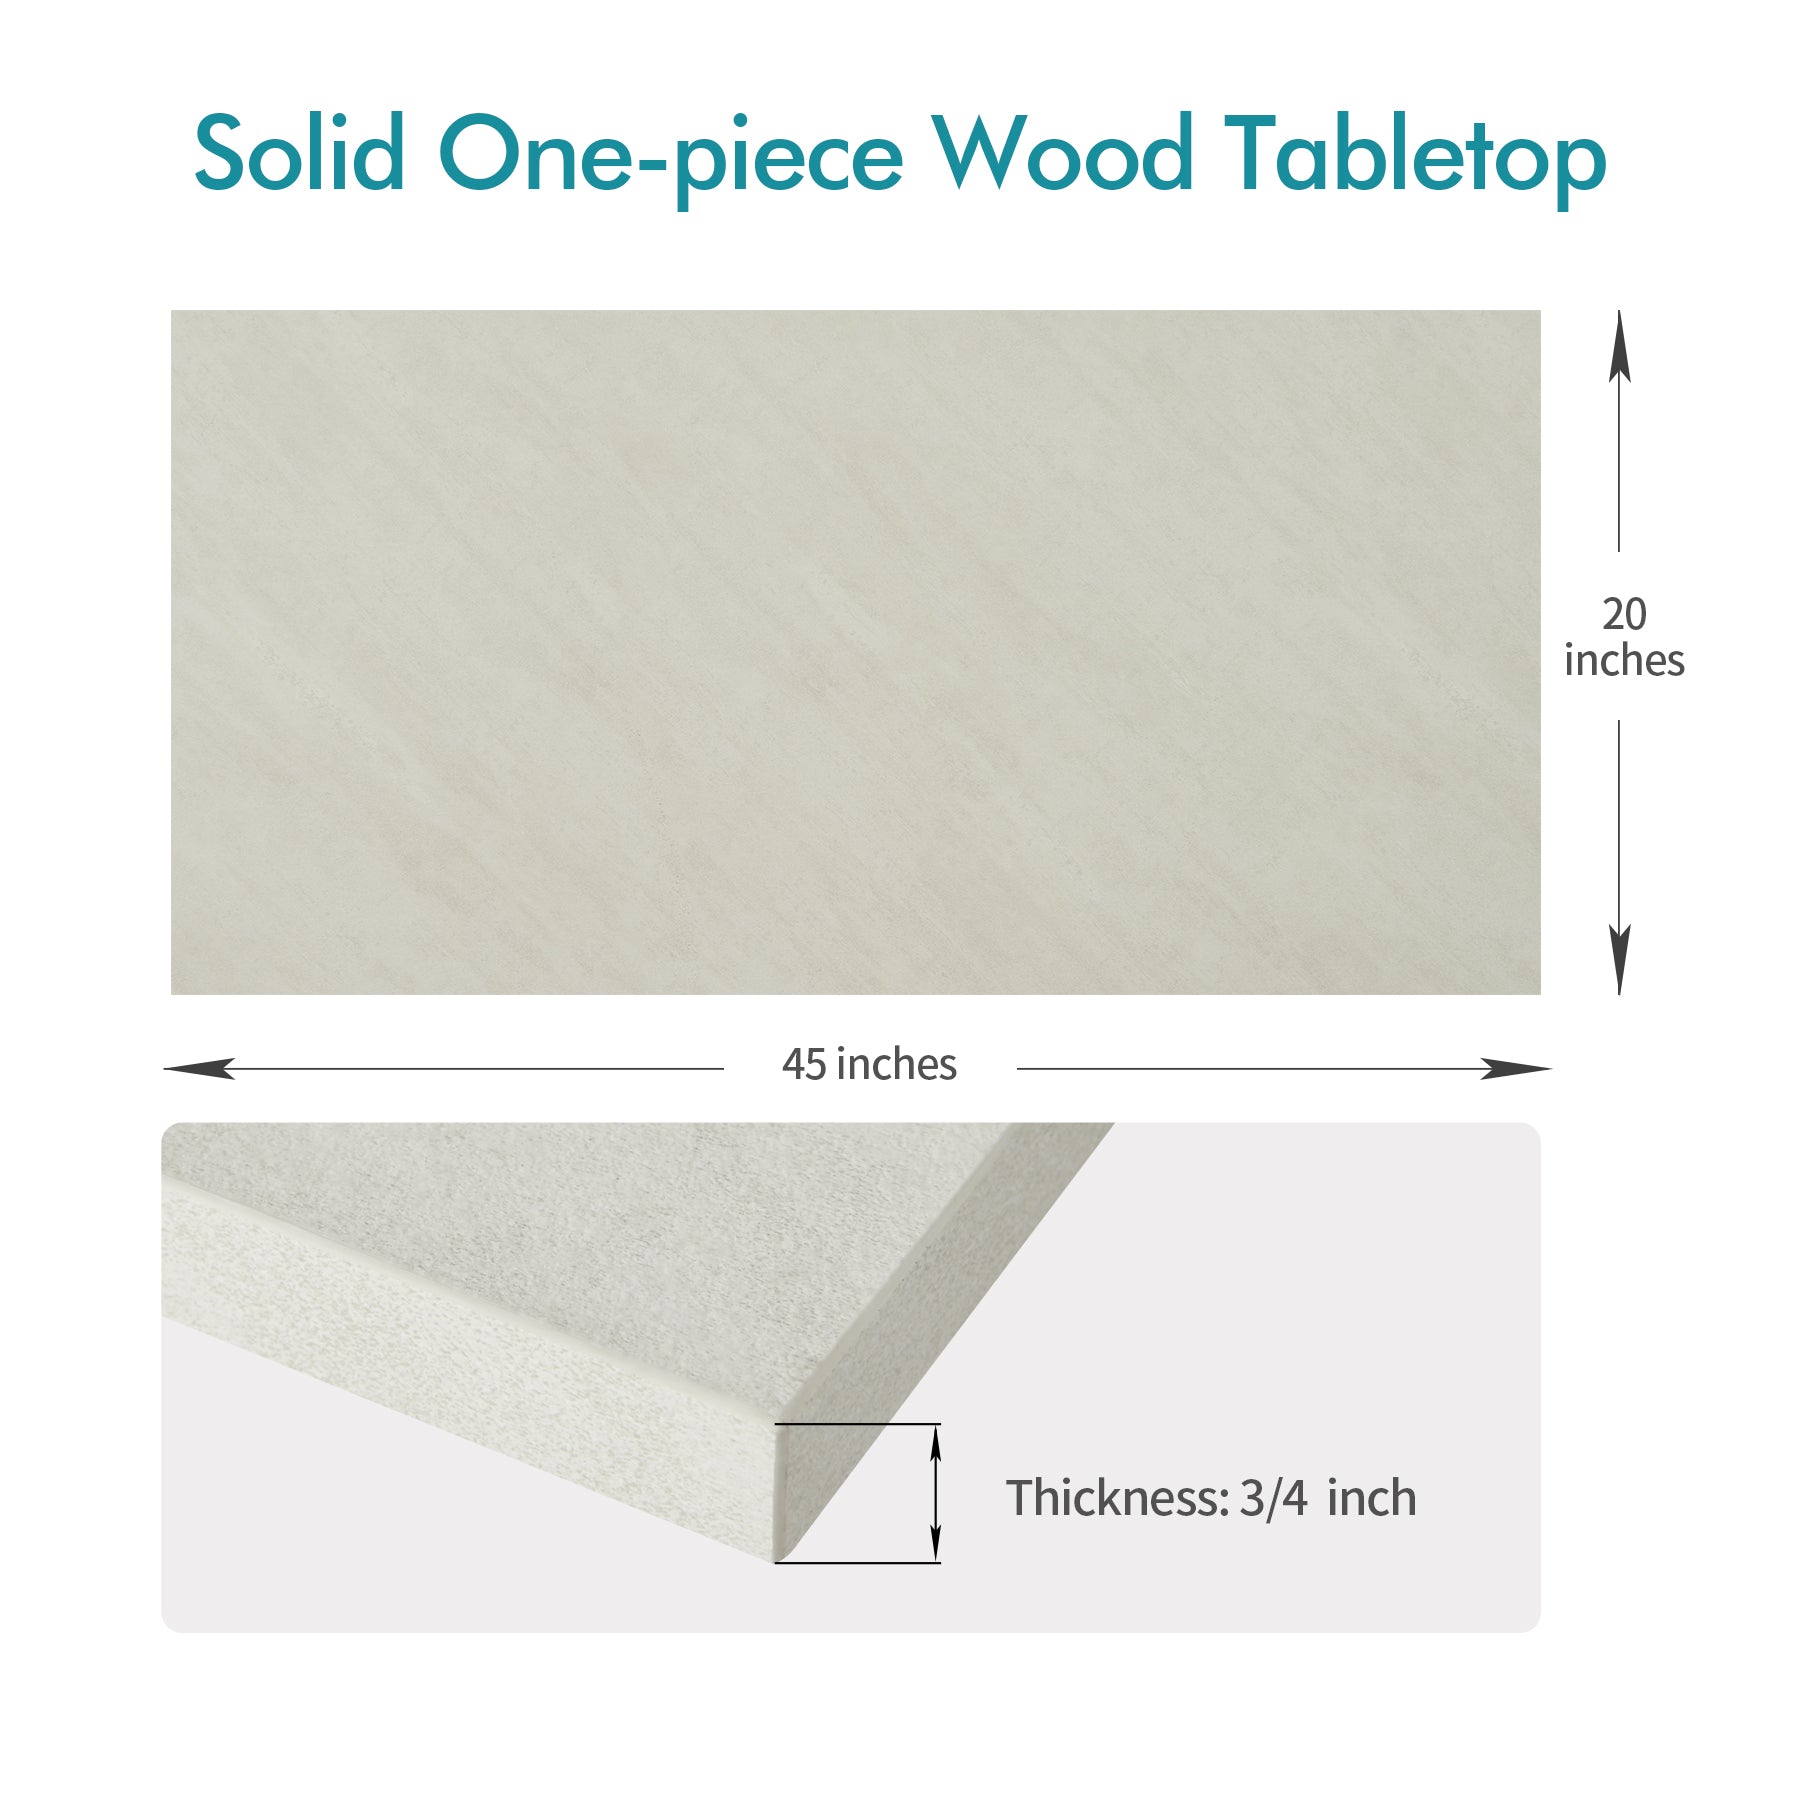 45x20 one-piece wood table top in white